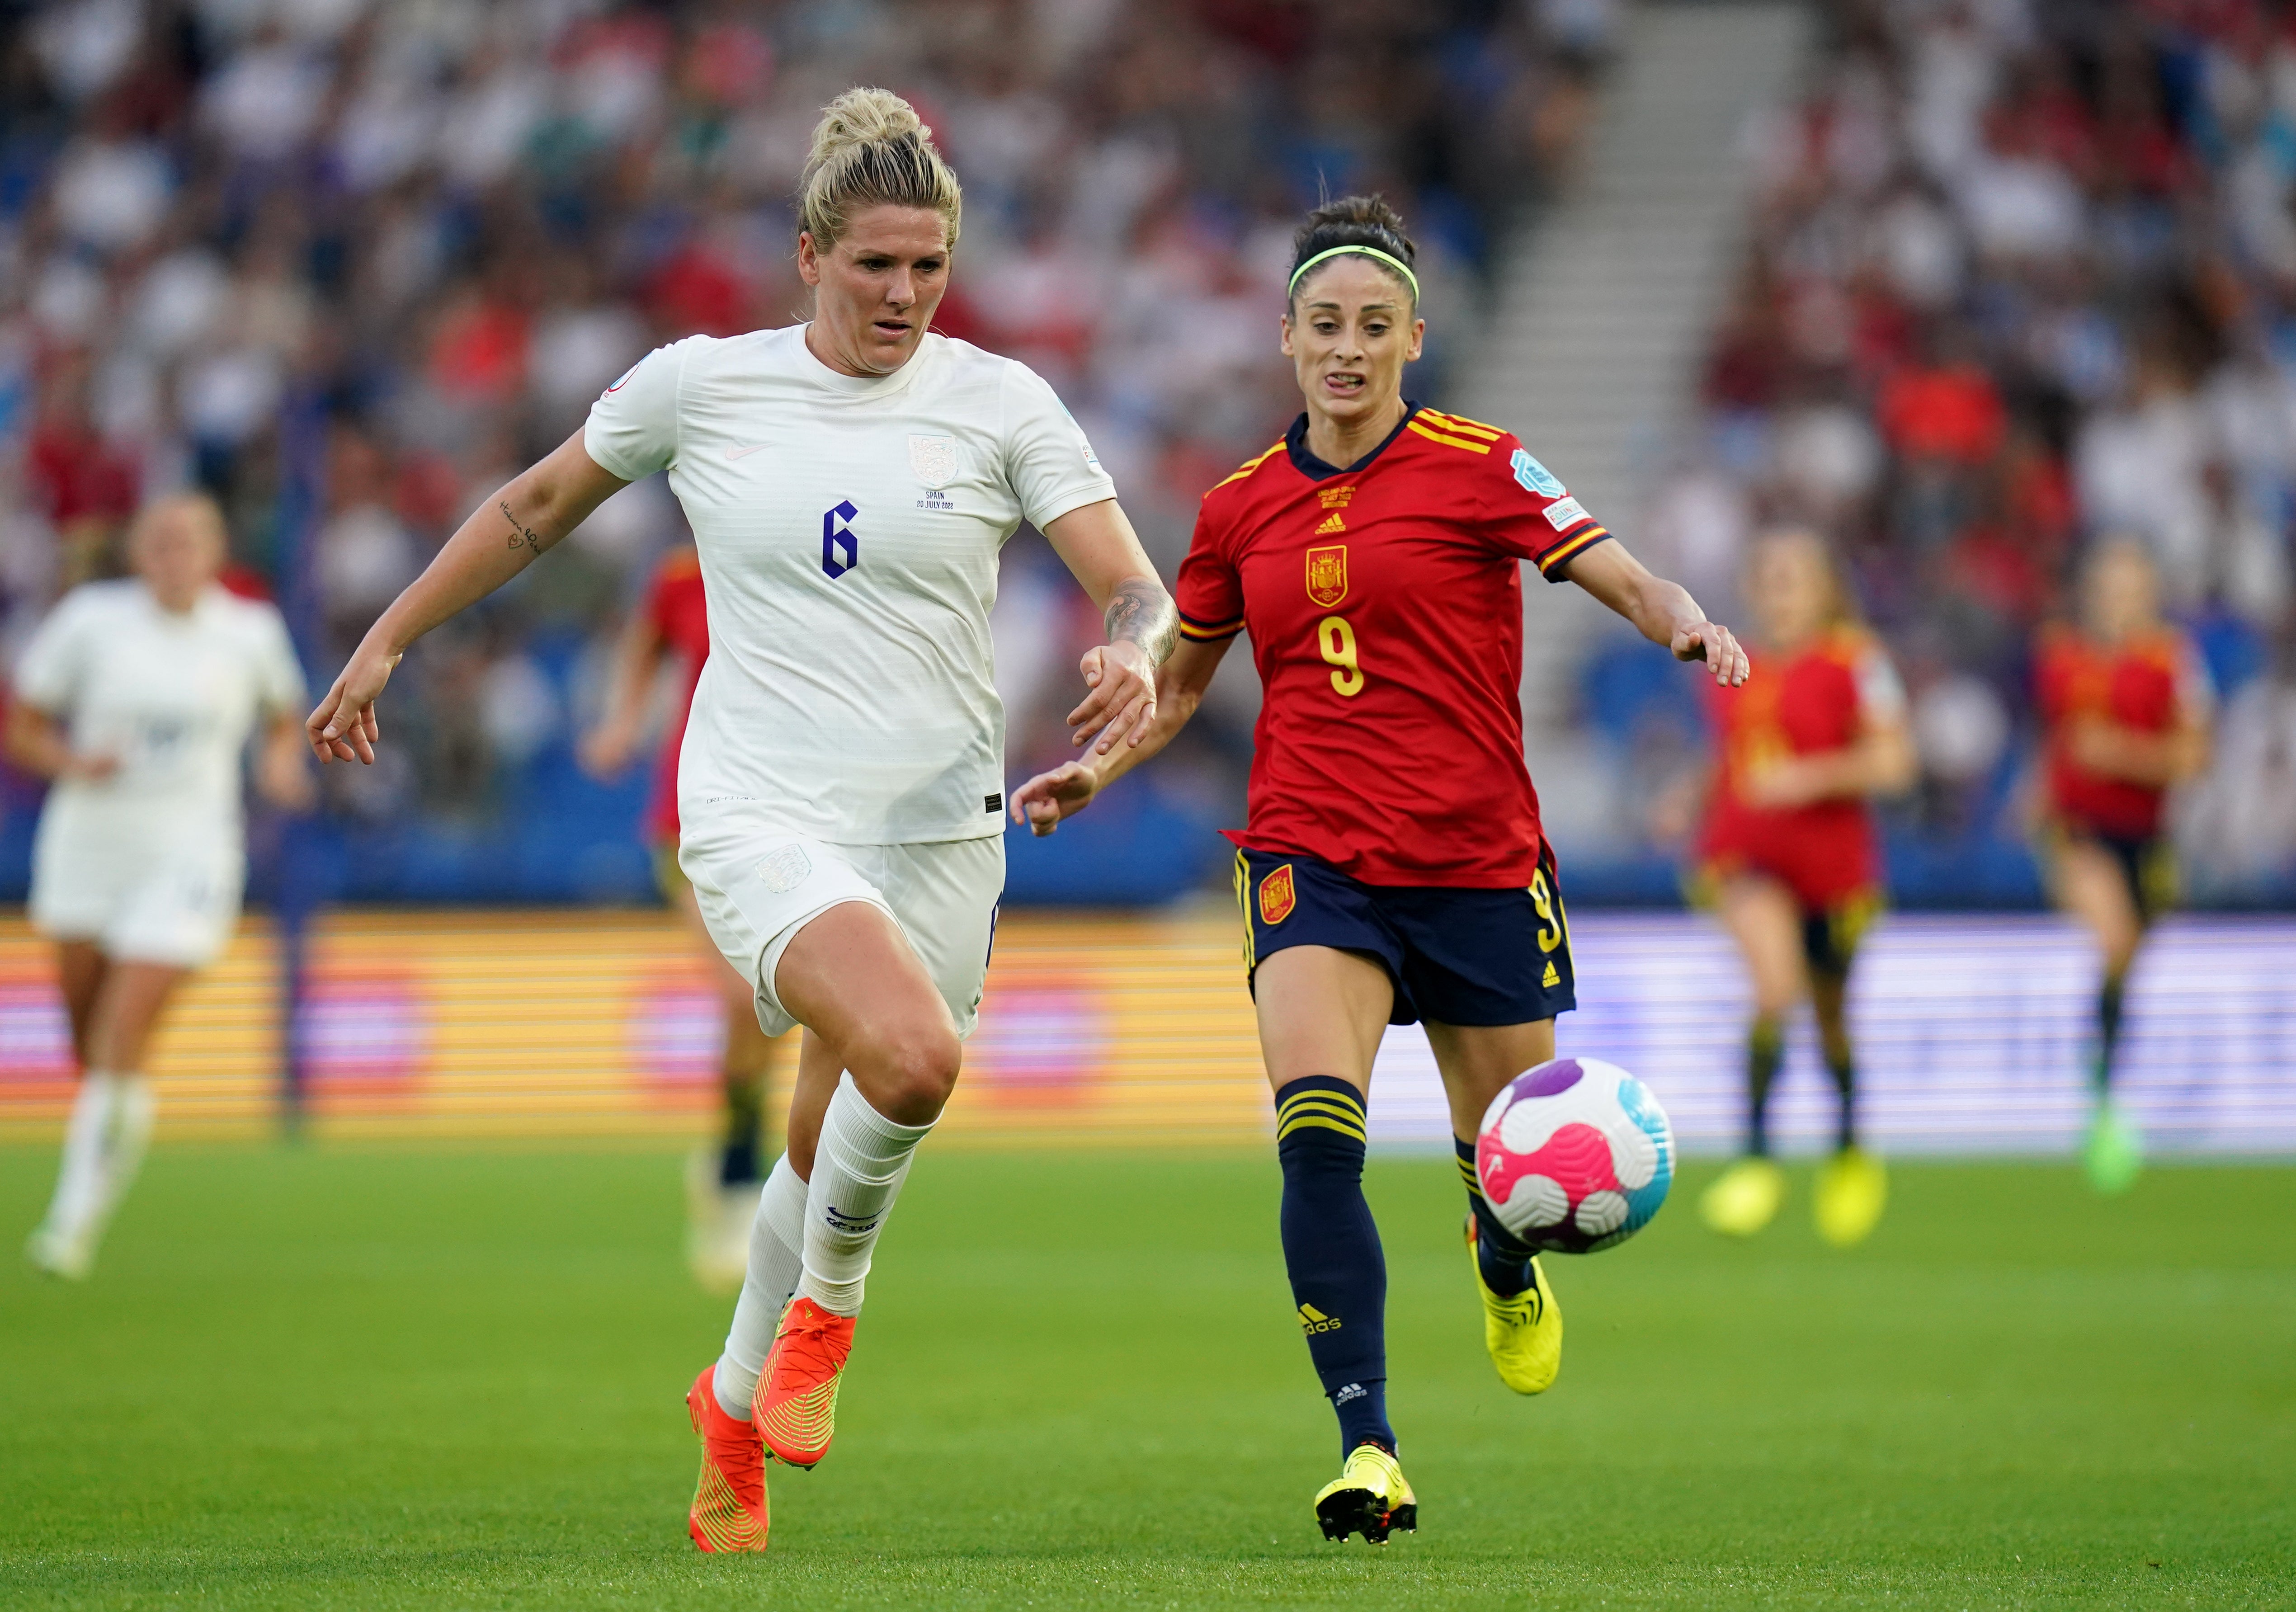 England’s Millie Bright will be crucial to limiting Germany’s threat in the final (Adam Davy/PA)